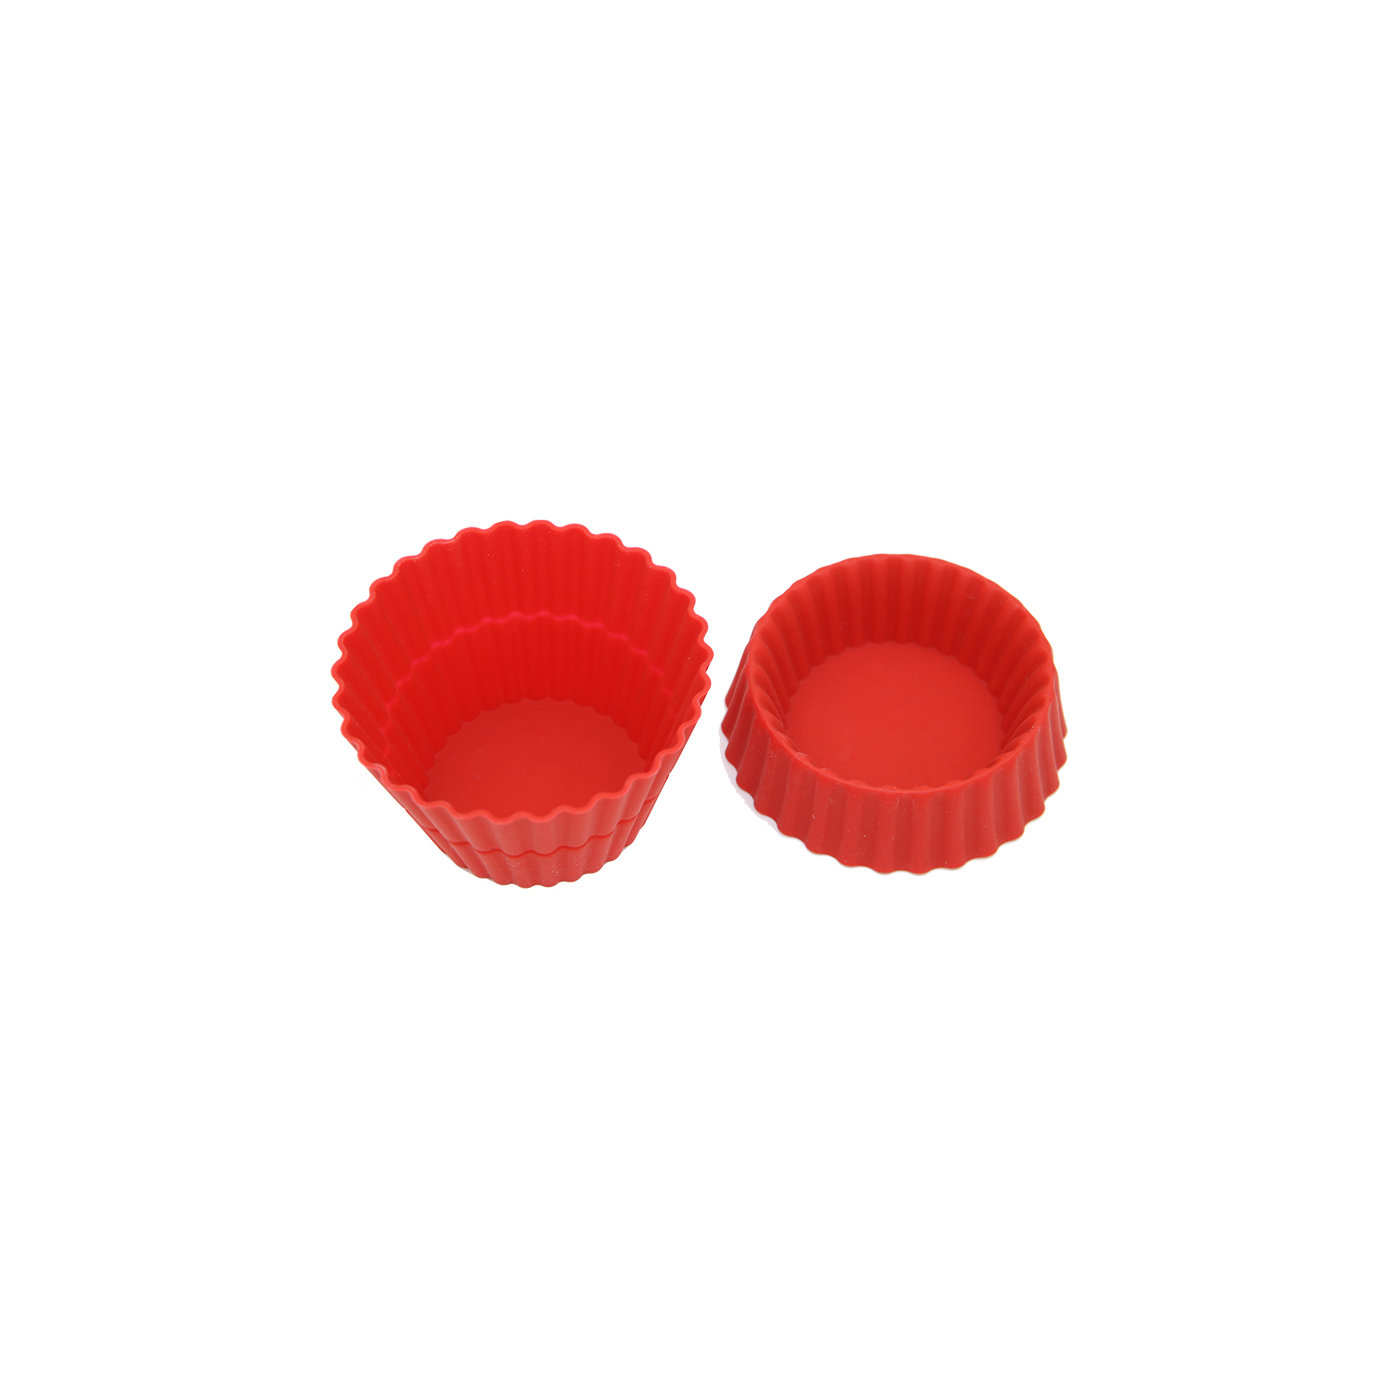 Dragon provide BM087 Foldable cup cake mould,silicone cake mould